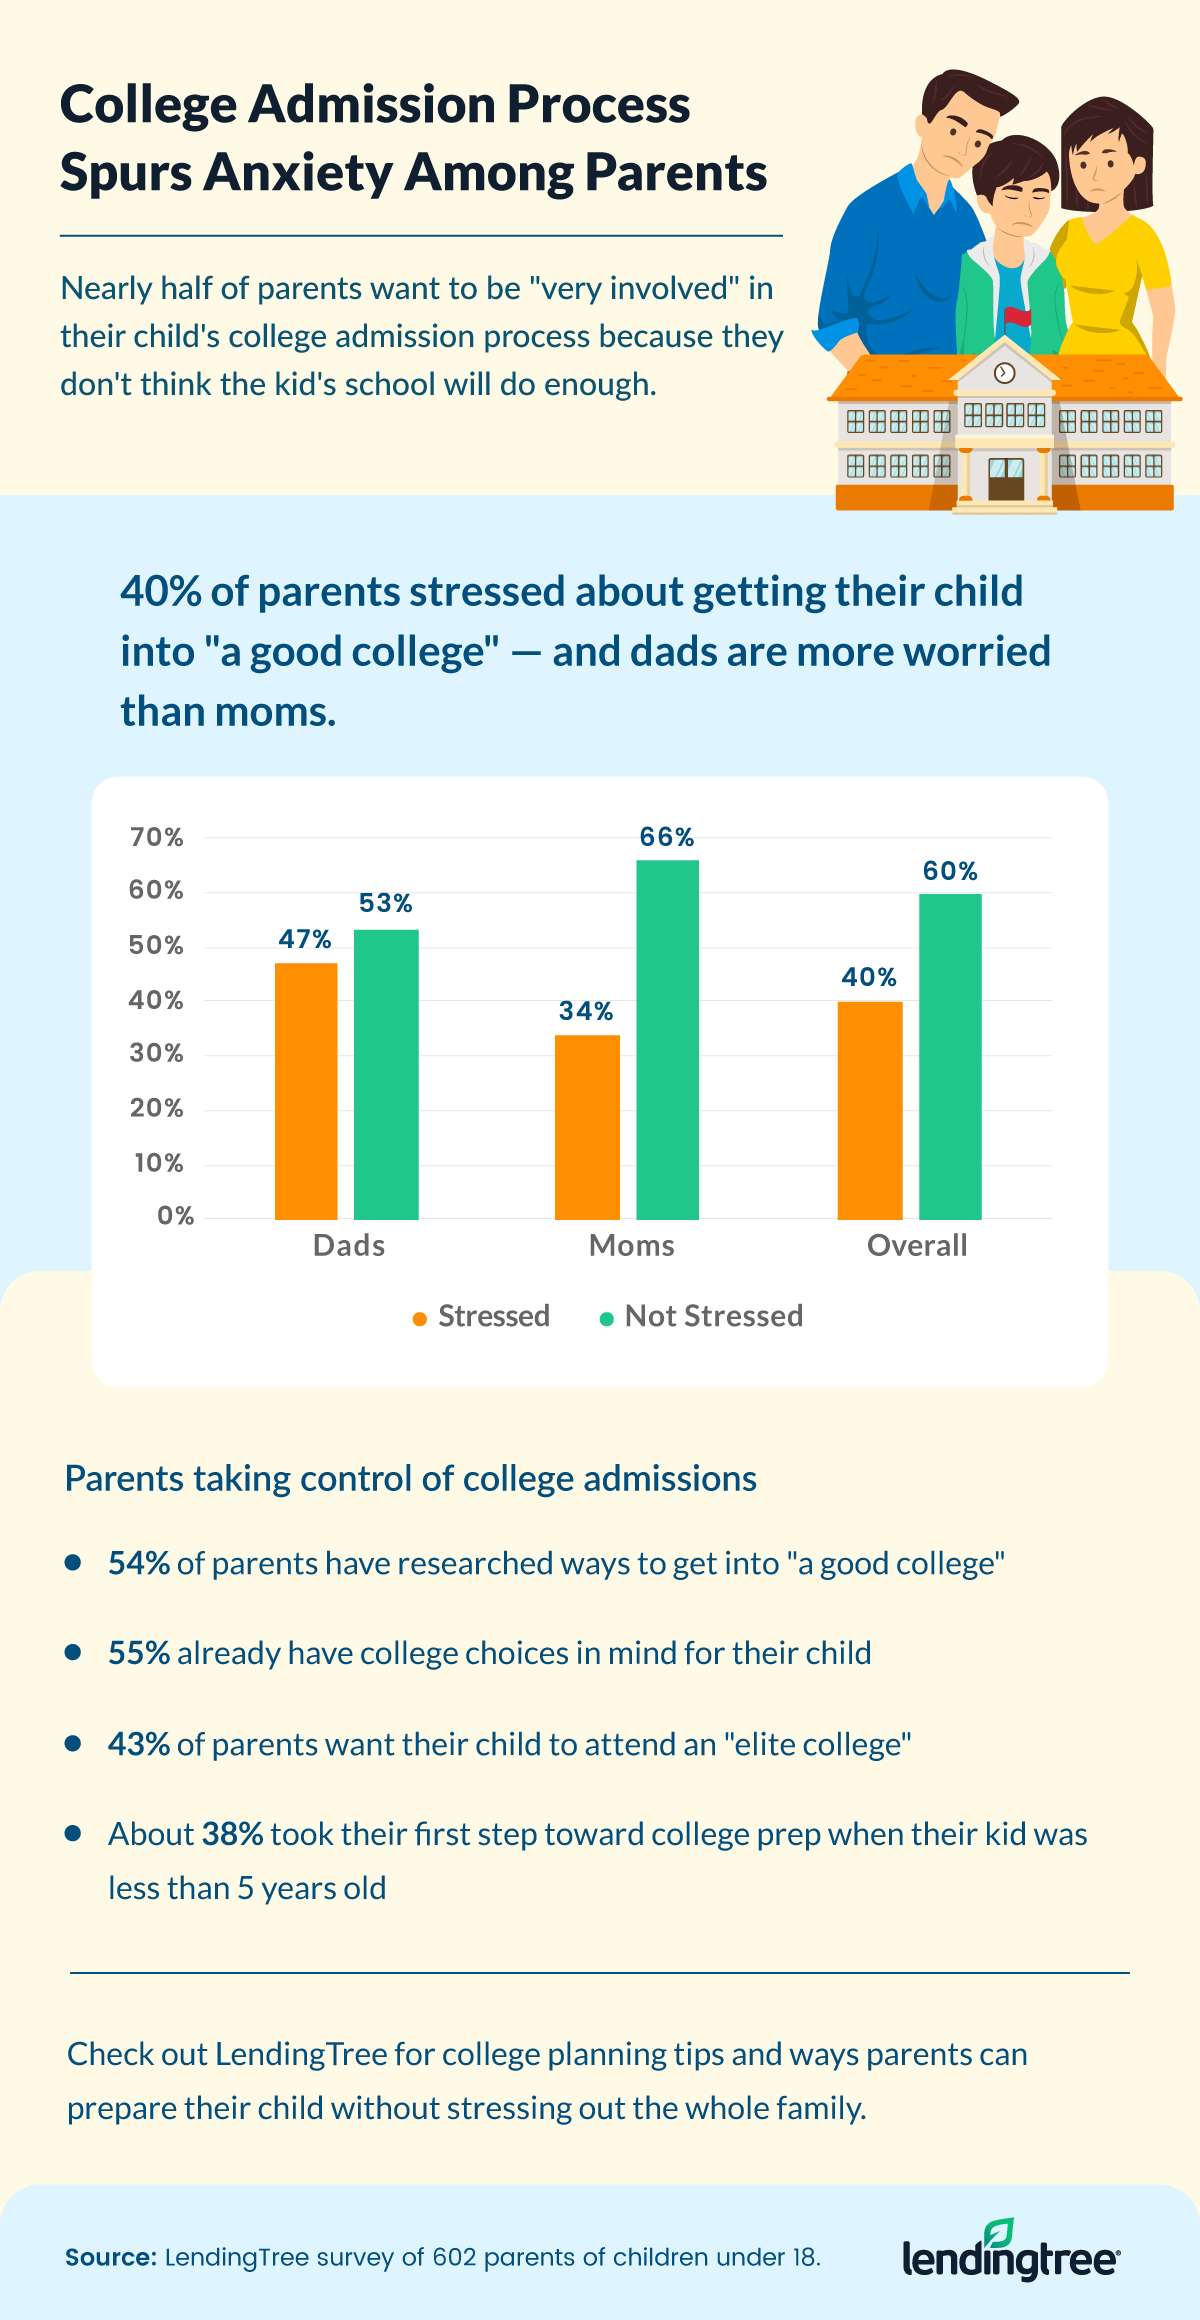 College Admission Process Spurs Anxiety Among Parents